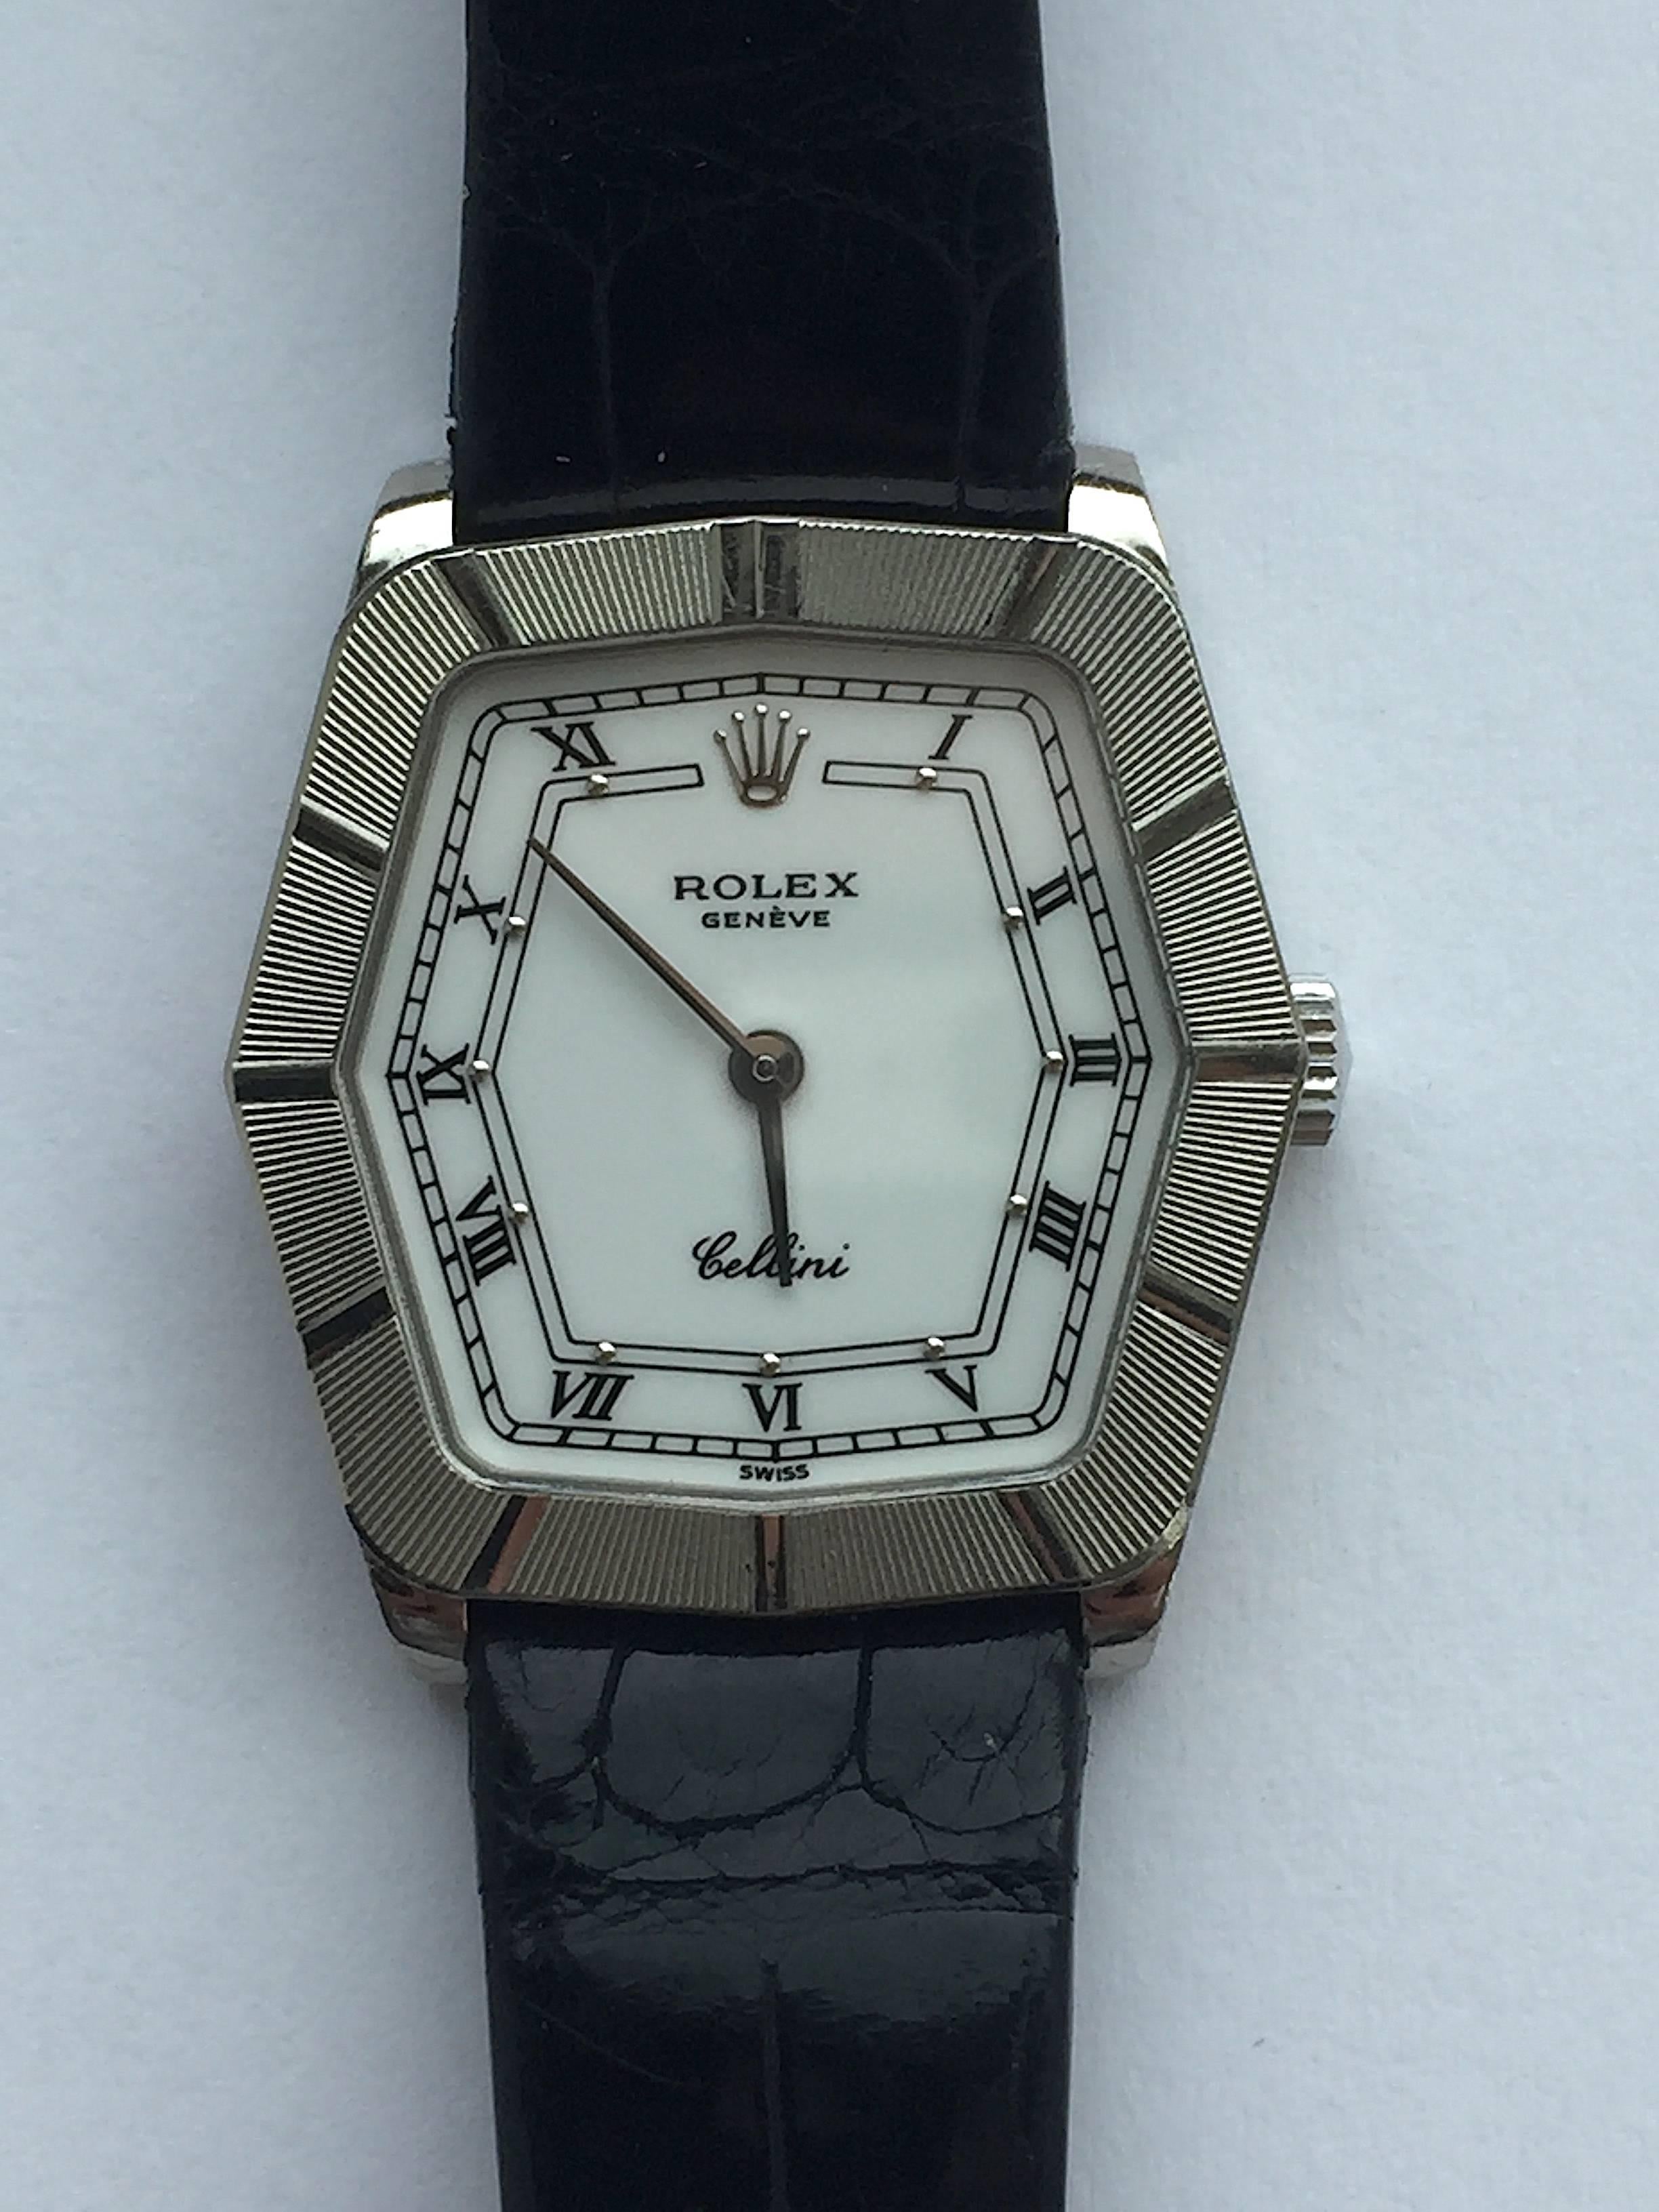 Rolex 18K White Gold Cellini Geometric Manual Wind Wristwatch In Excellent Condition For Sale In New York, NY